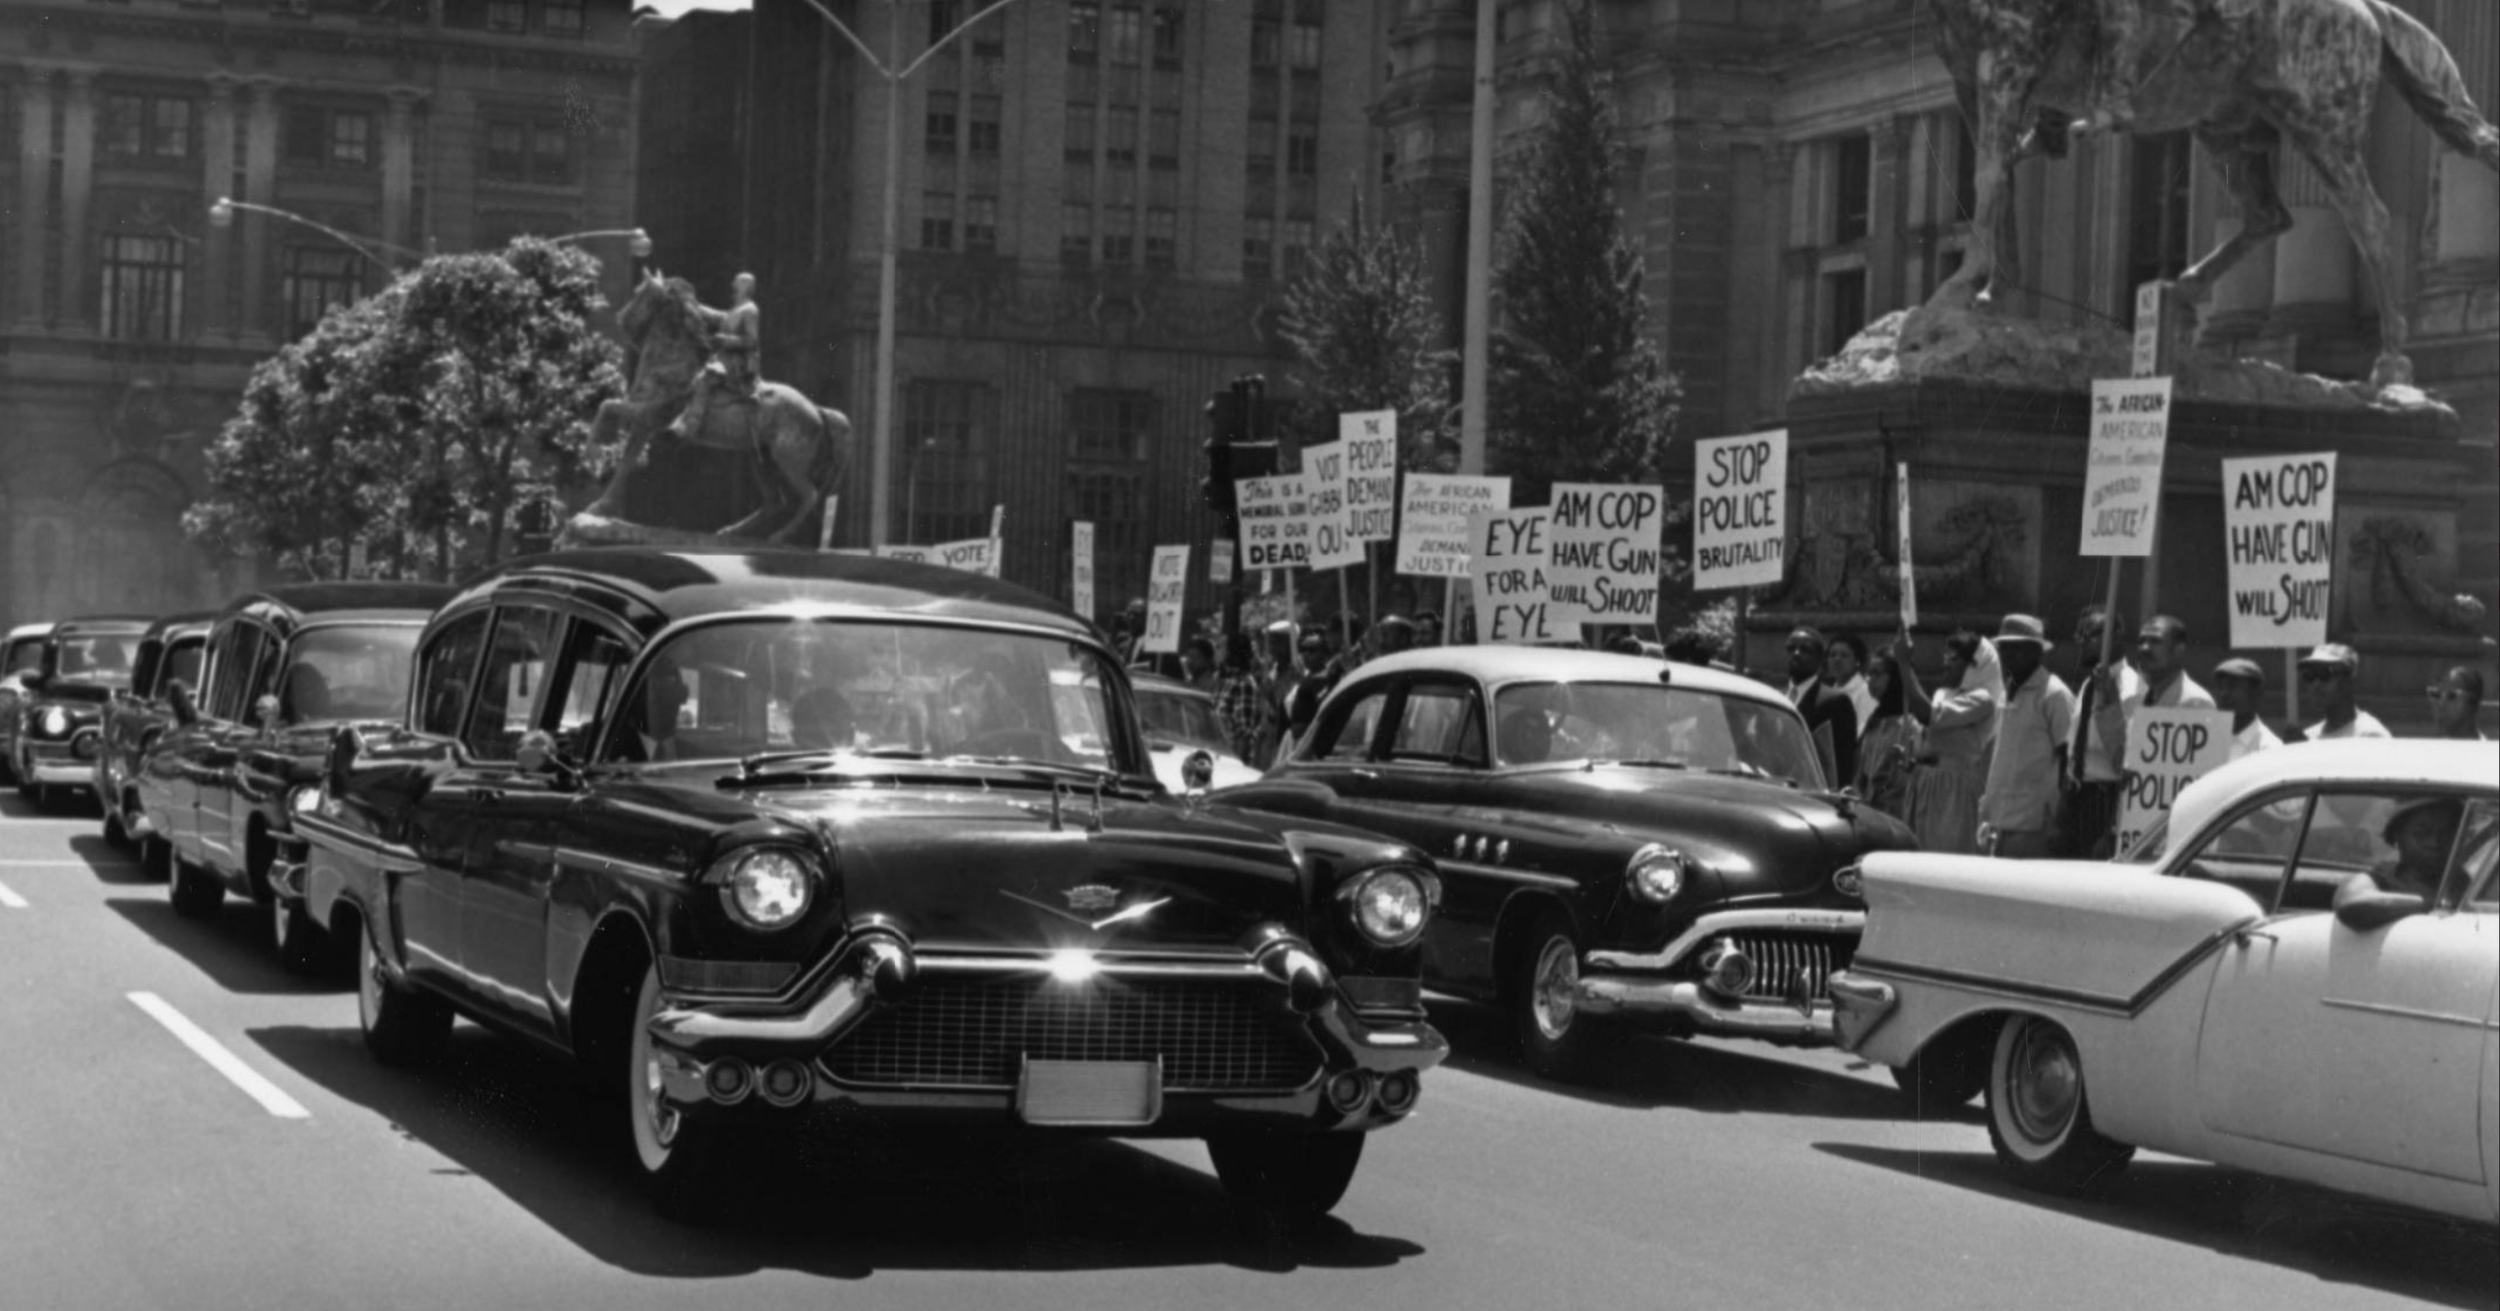   A protest against police brutality, 1960. Hearses carrying the bodies of Ella Lucy Jones and Louise Jones circle Philadelphia City Hall while protestors circle City Hall on foot, carrying signs that read “This is a memorial for our dead,” “The peop